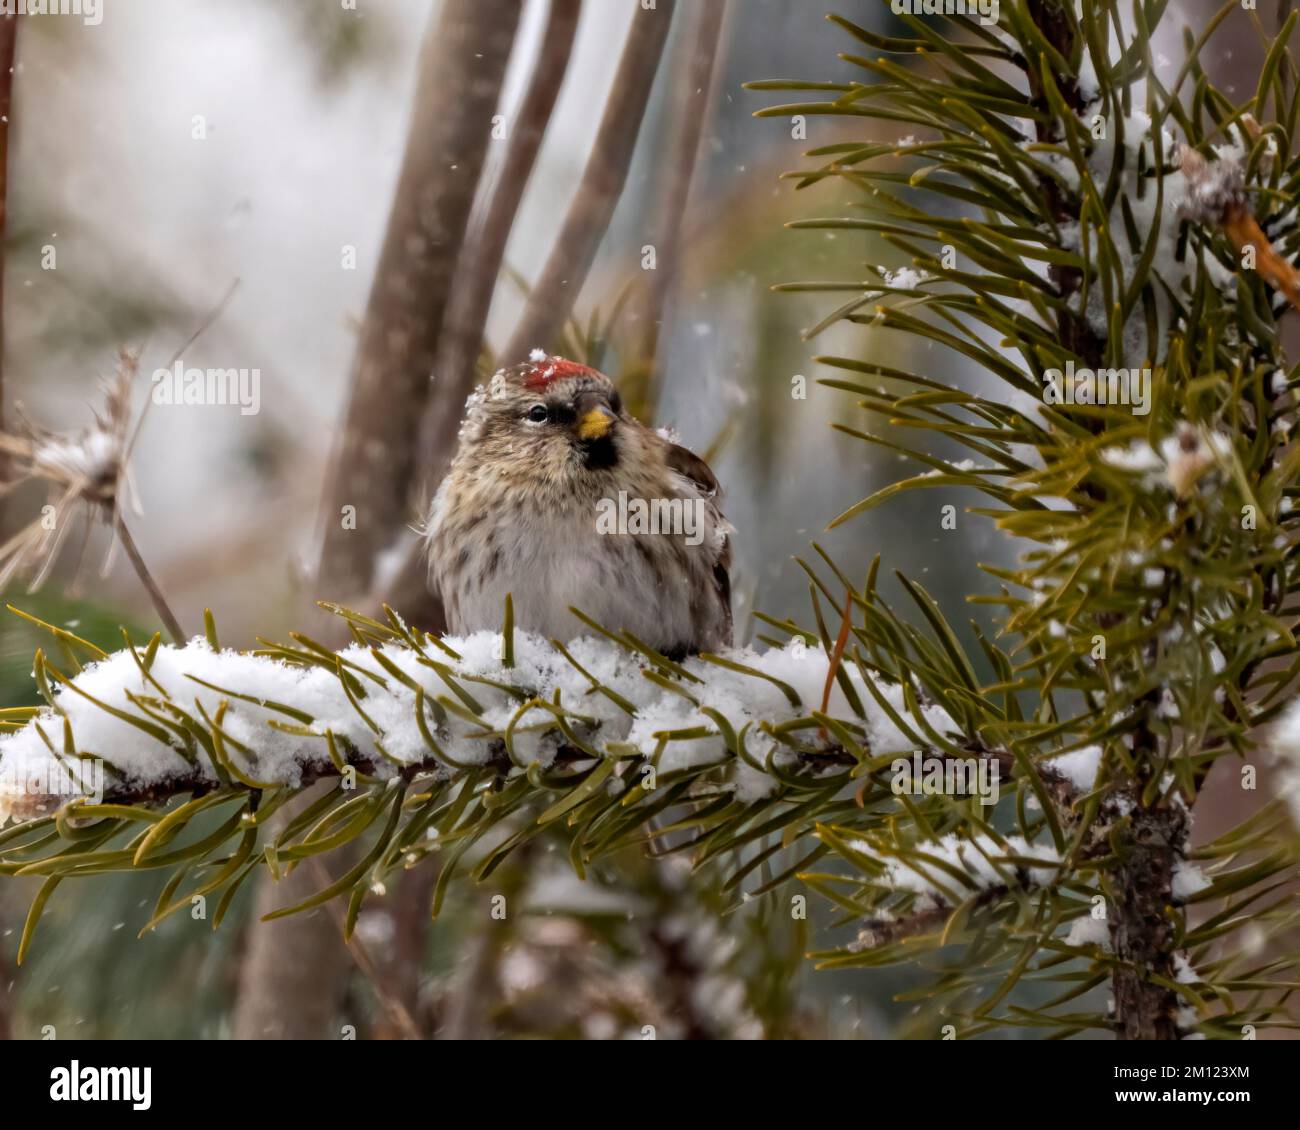 Red Poll female perched on a spruce branch with a forest background in the winter season with falling snow in its environment and habitat surrounding. Stock Photo